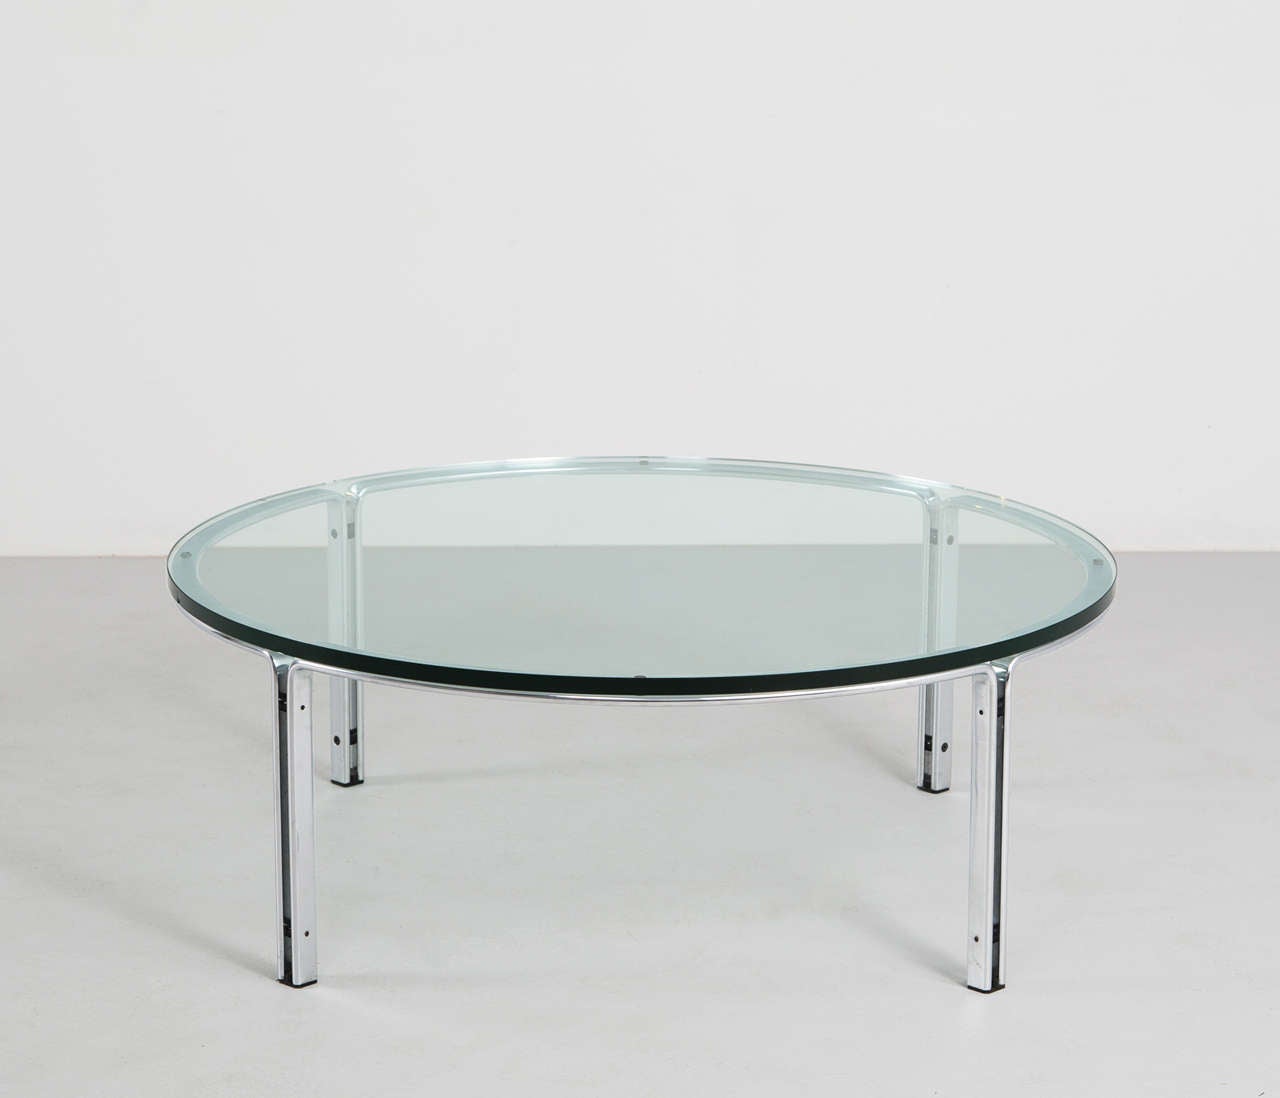 Horst Bruning for Kill International, coffee table, in steel and glass, Germany, 1970s. 

Round cocktail table in chrome plates steel and glass. The design is simplistic, yet due the combination of materials, this table gets it characteristic modern